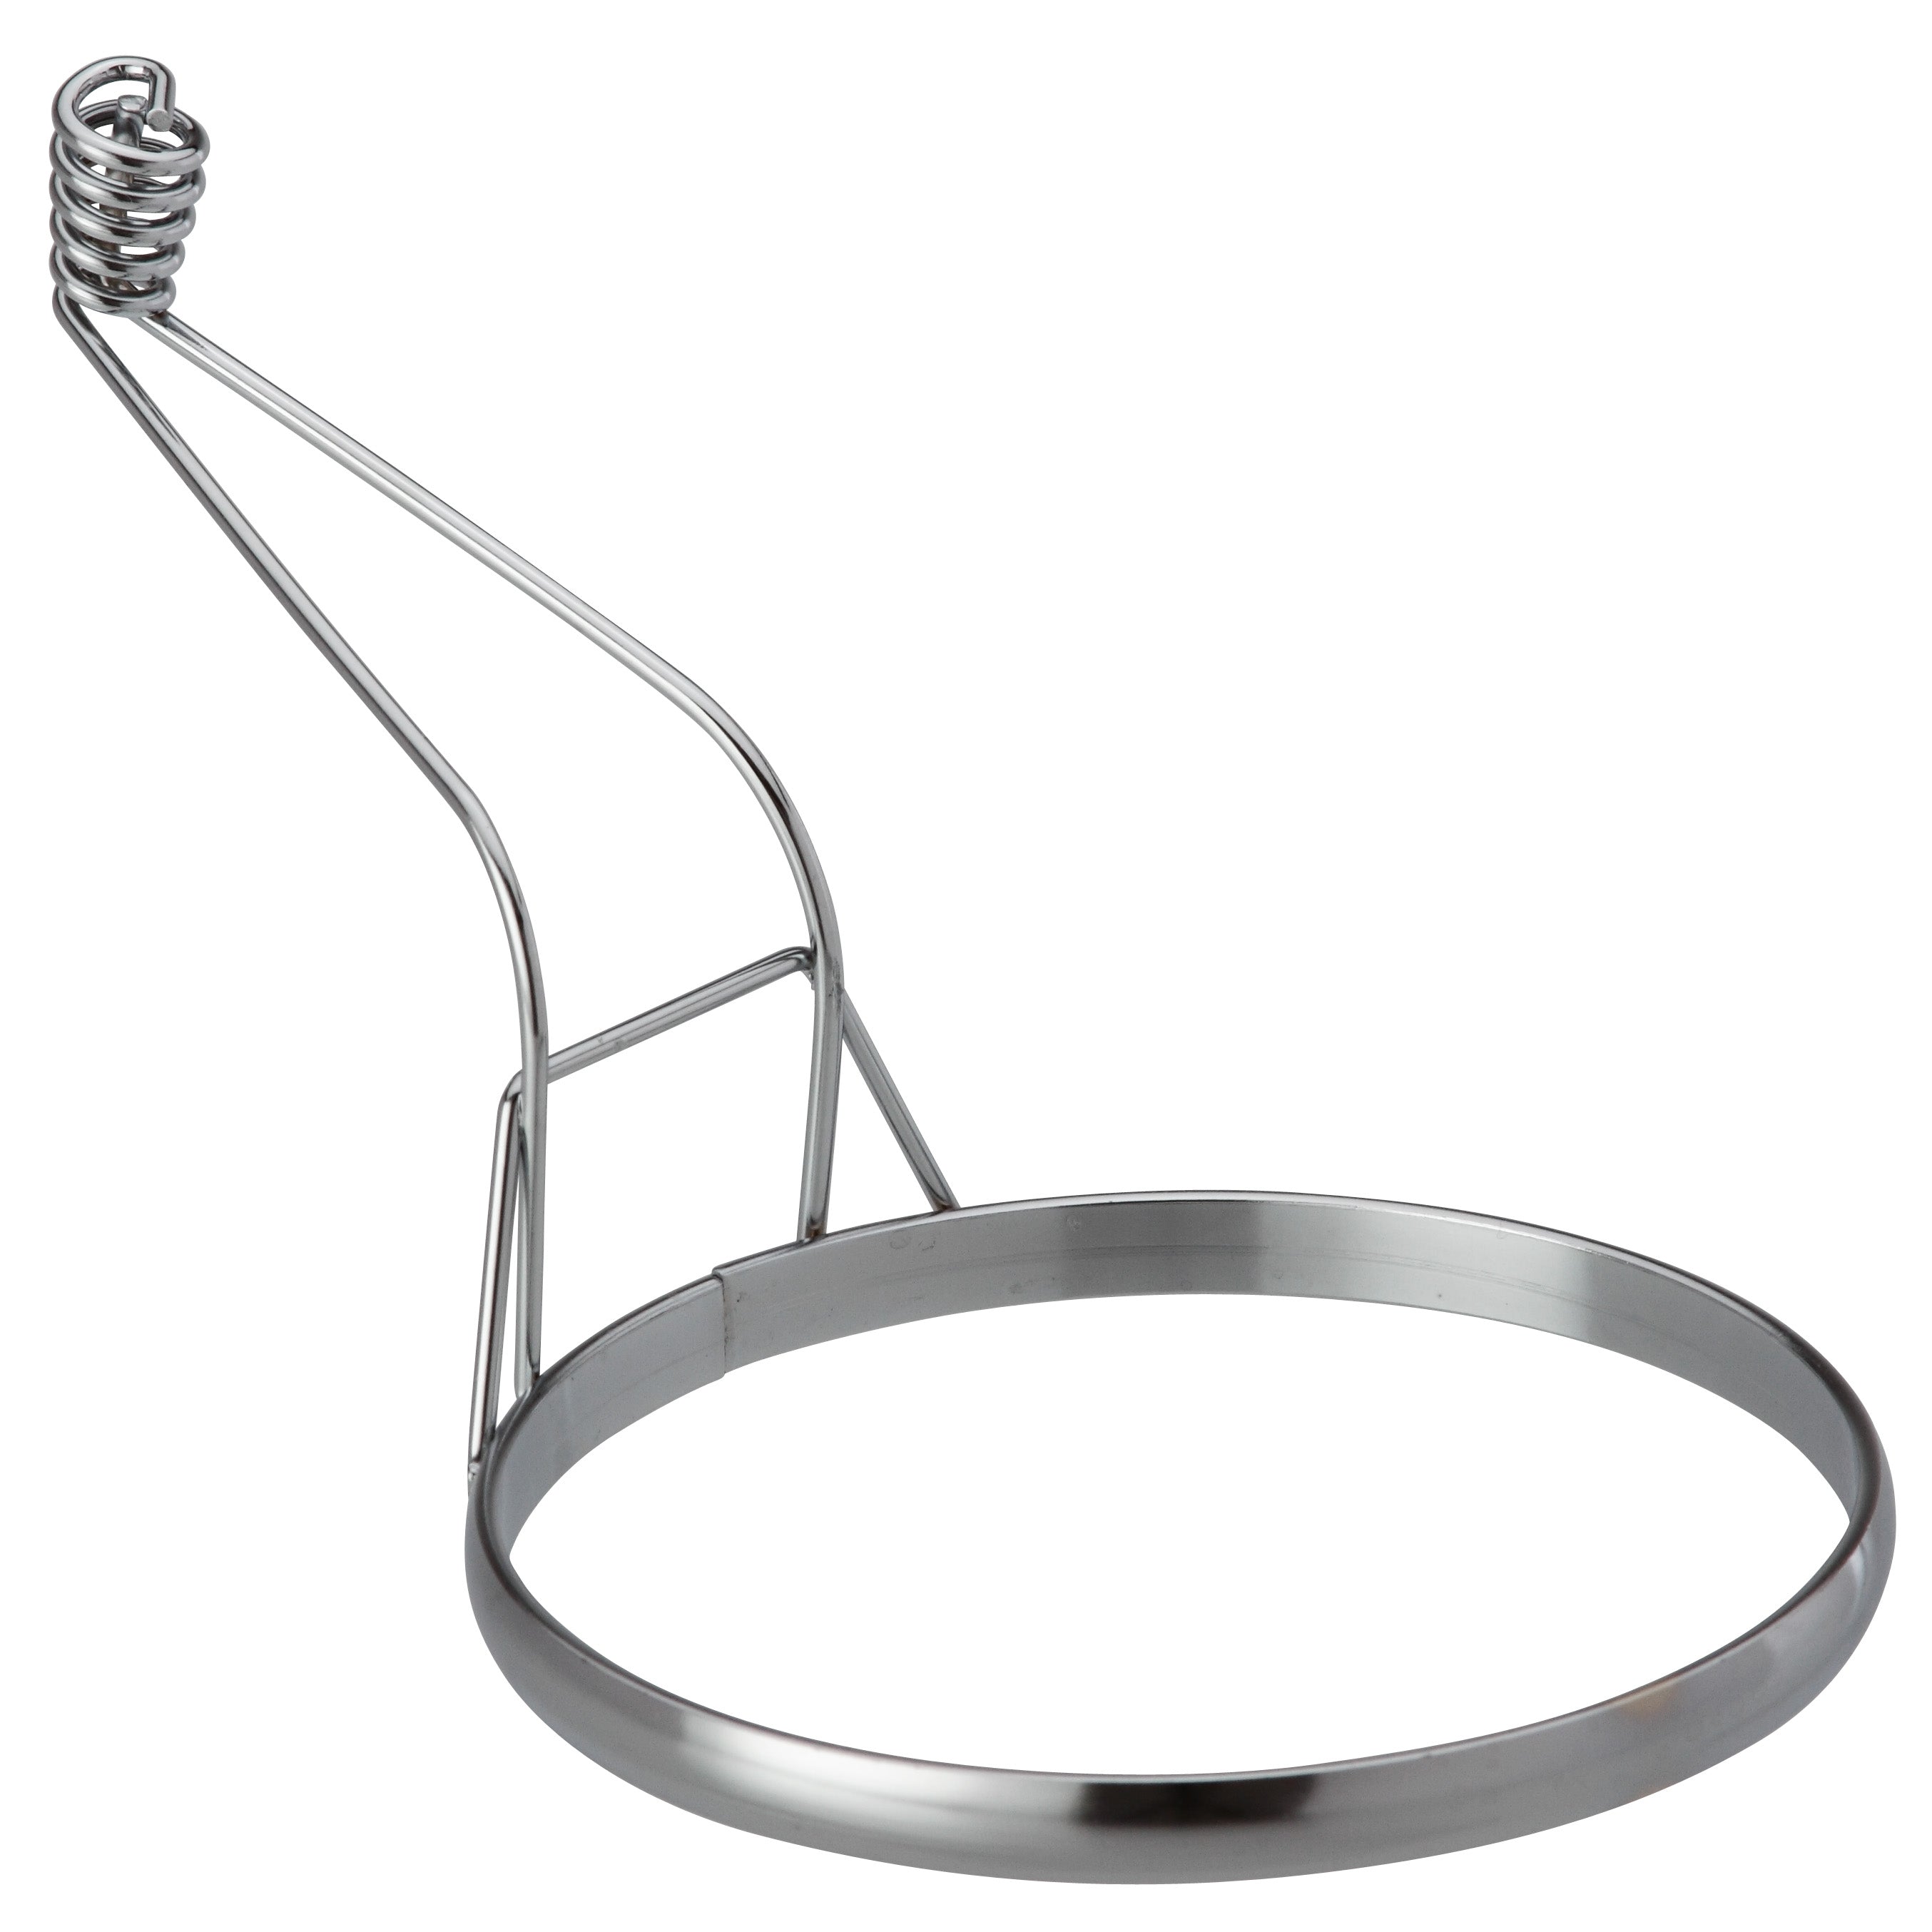 Royal Industries Round Deluxe Chrome-Plated Egg Ring